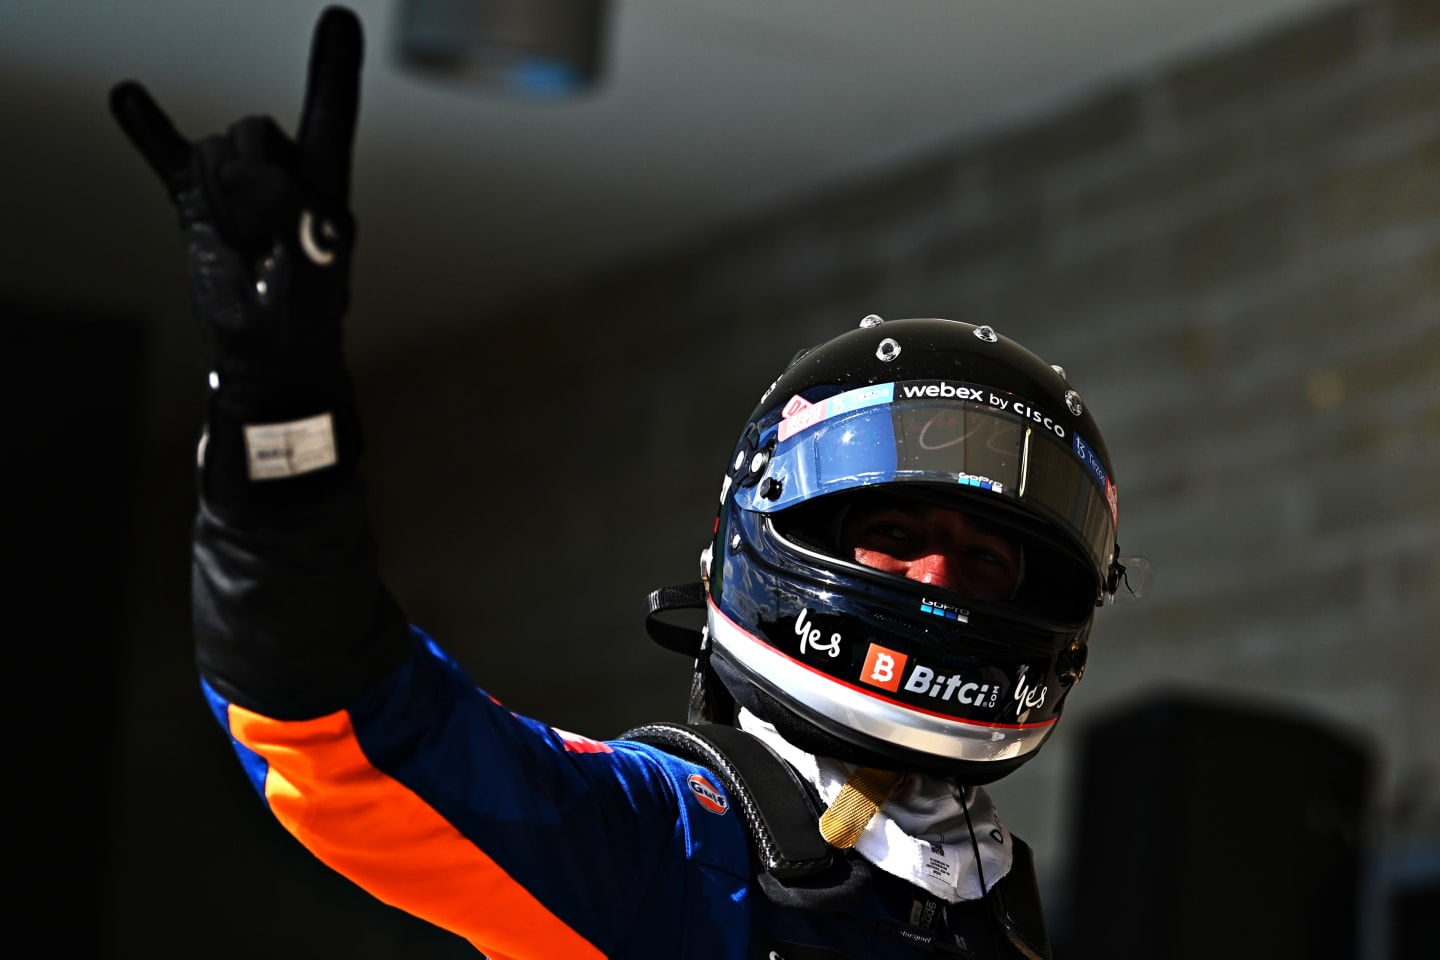 AUSTIN, TEXAS - OCTOBER 24: Daniel Ricciardo of Australia and McLaren F1 waves to the crowd from parc ferme during the F1 Grand Prix of USA at Circuit of The Americas on October 24, 2021 in Austin, Texas. (Photo by Clive Mason - Formula 1/Formula 1 via Getty Images)